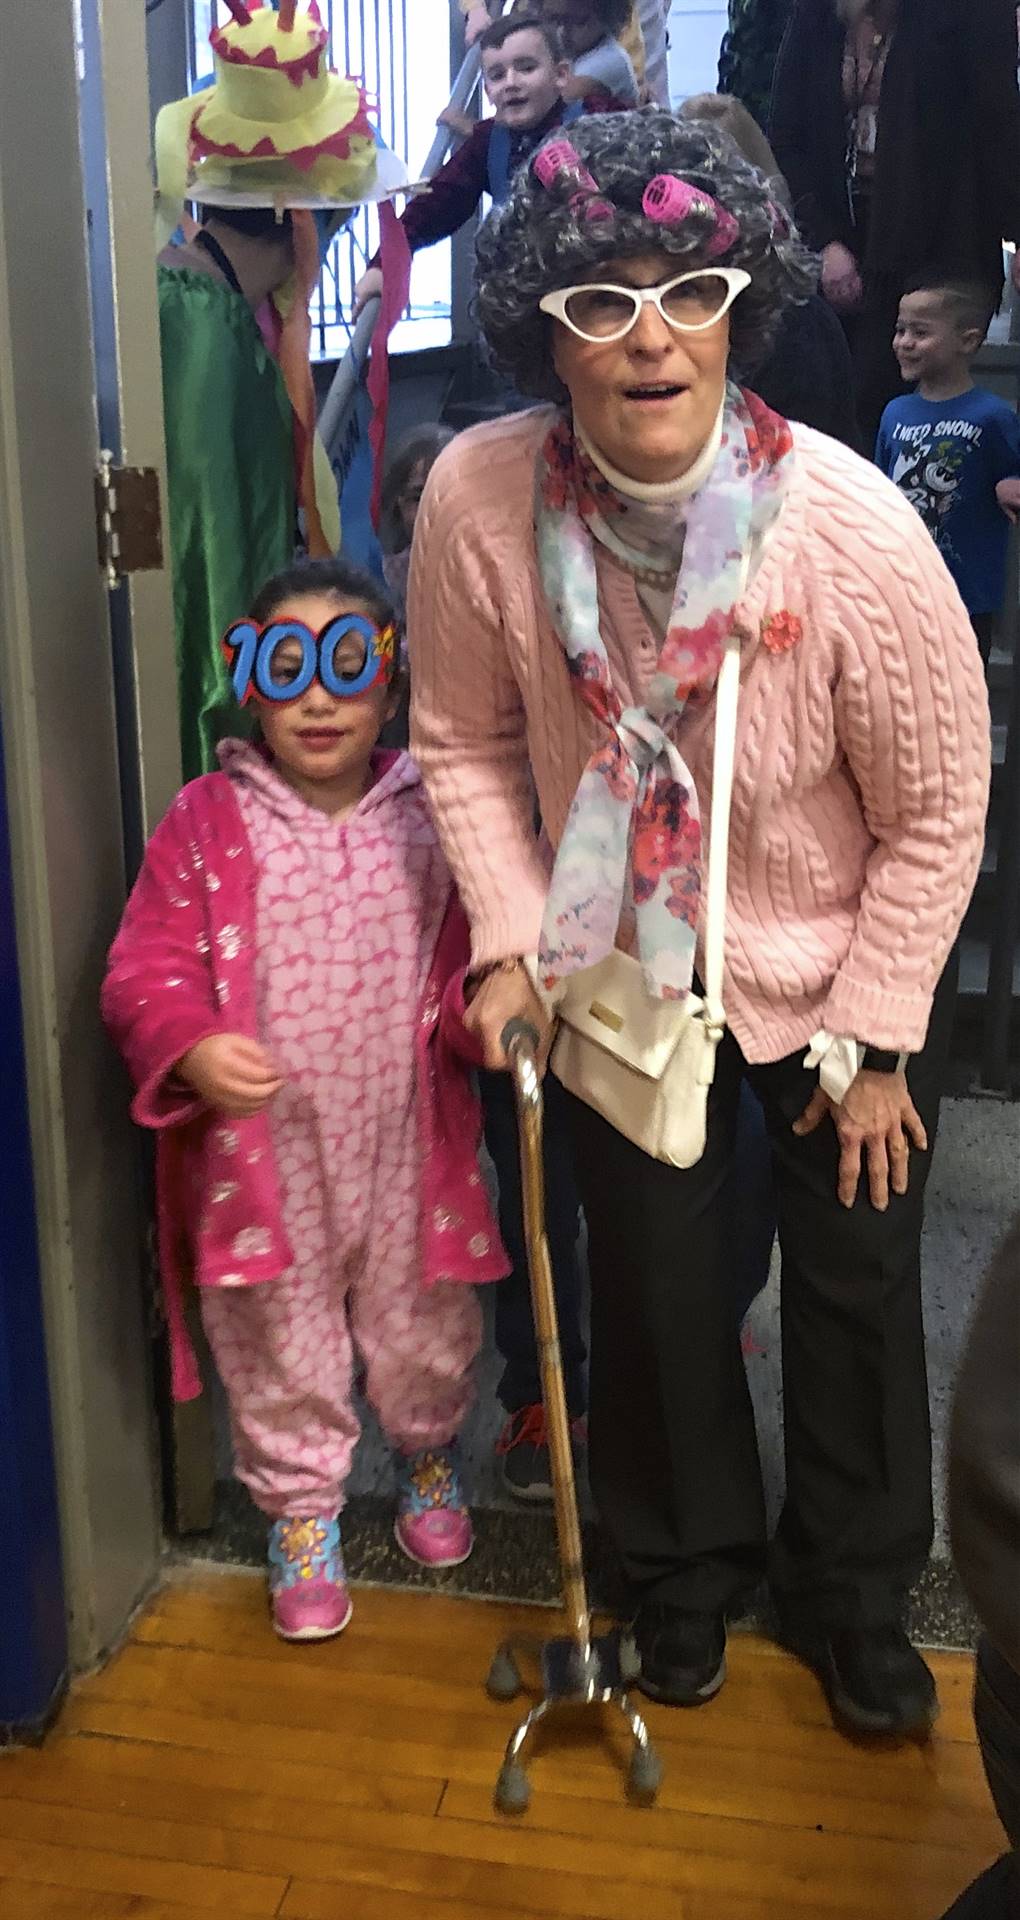 A teacher and student dressed as 100 yr. old.